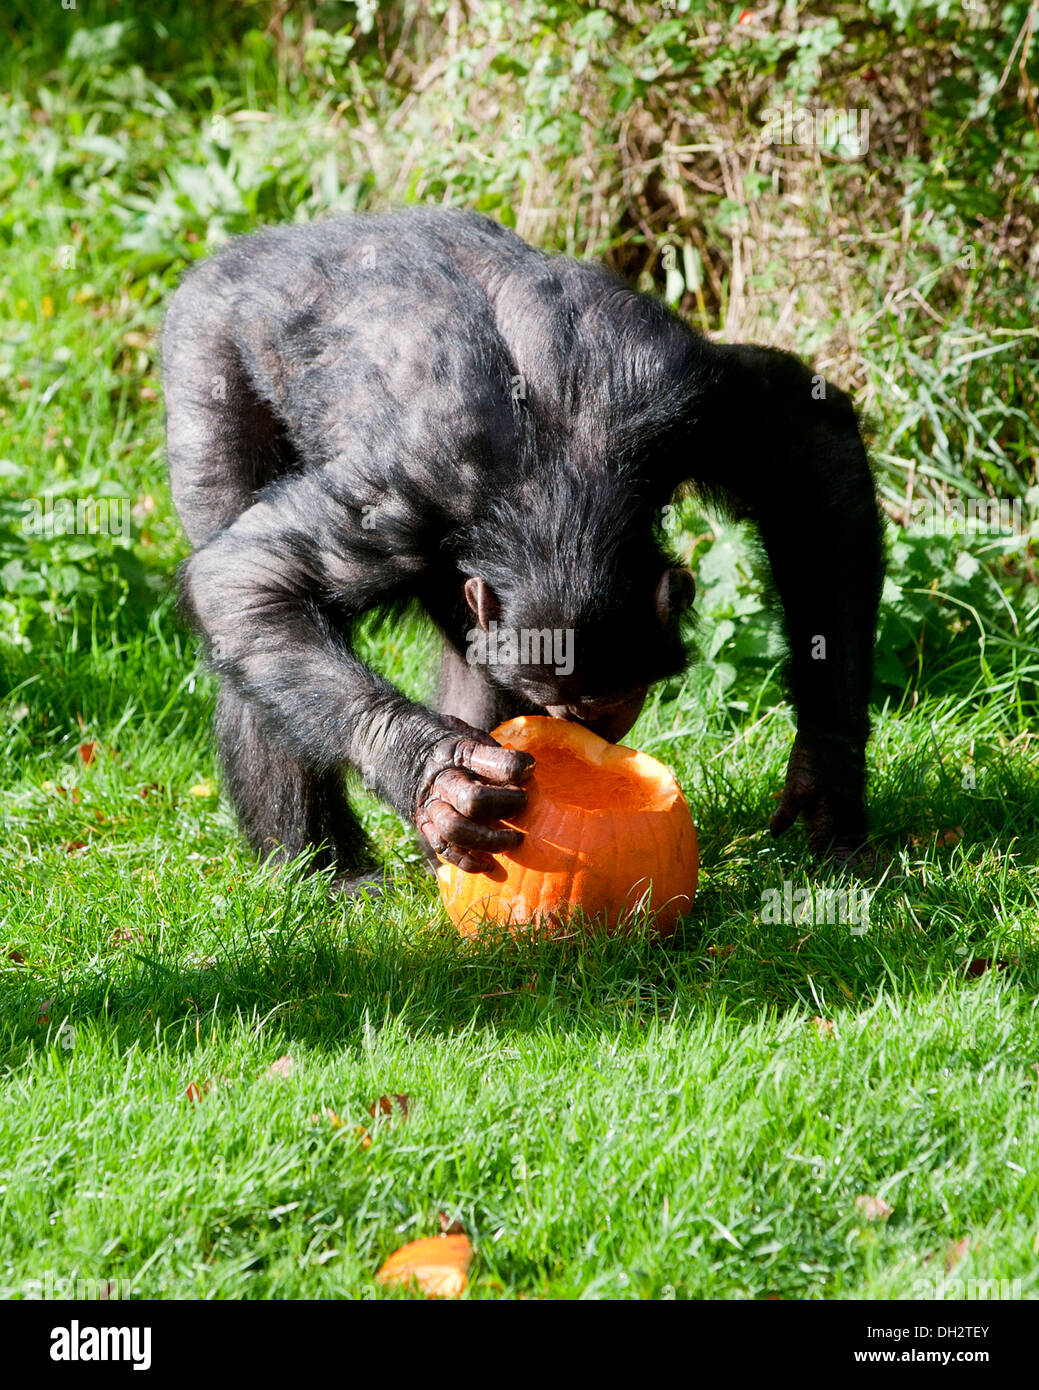 Dunstable, Bedfordshire, UK. 30th Oct, 2013. The animals at ZSL Whipsnade Zoo will be getting their fangs into some tasty treats , as they’re dished up pumpkin platters to get them into the spooky spirit. chimpanzees playing with their  Jack O ’Lanterns.© Brian Jordan/Alamy Live News Stock Photo